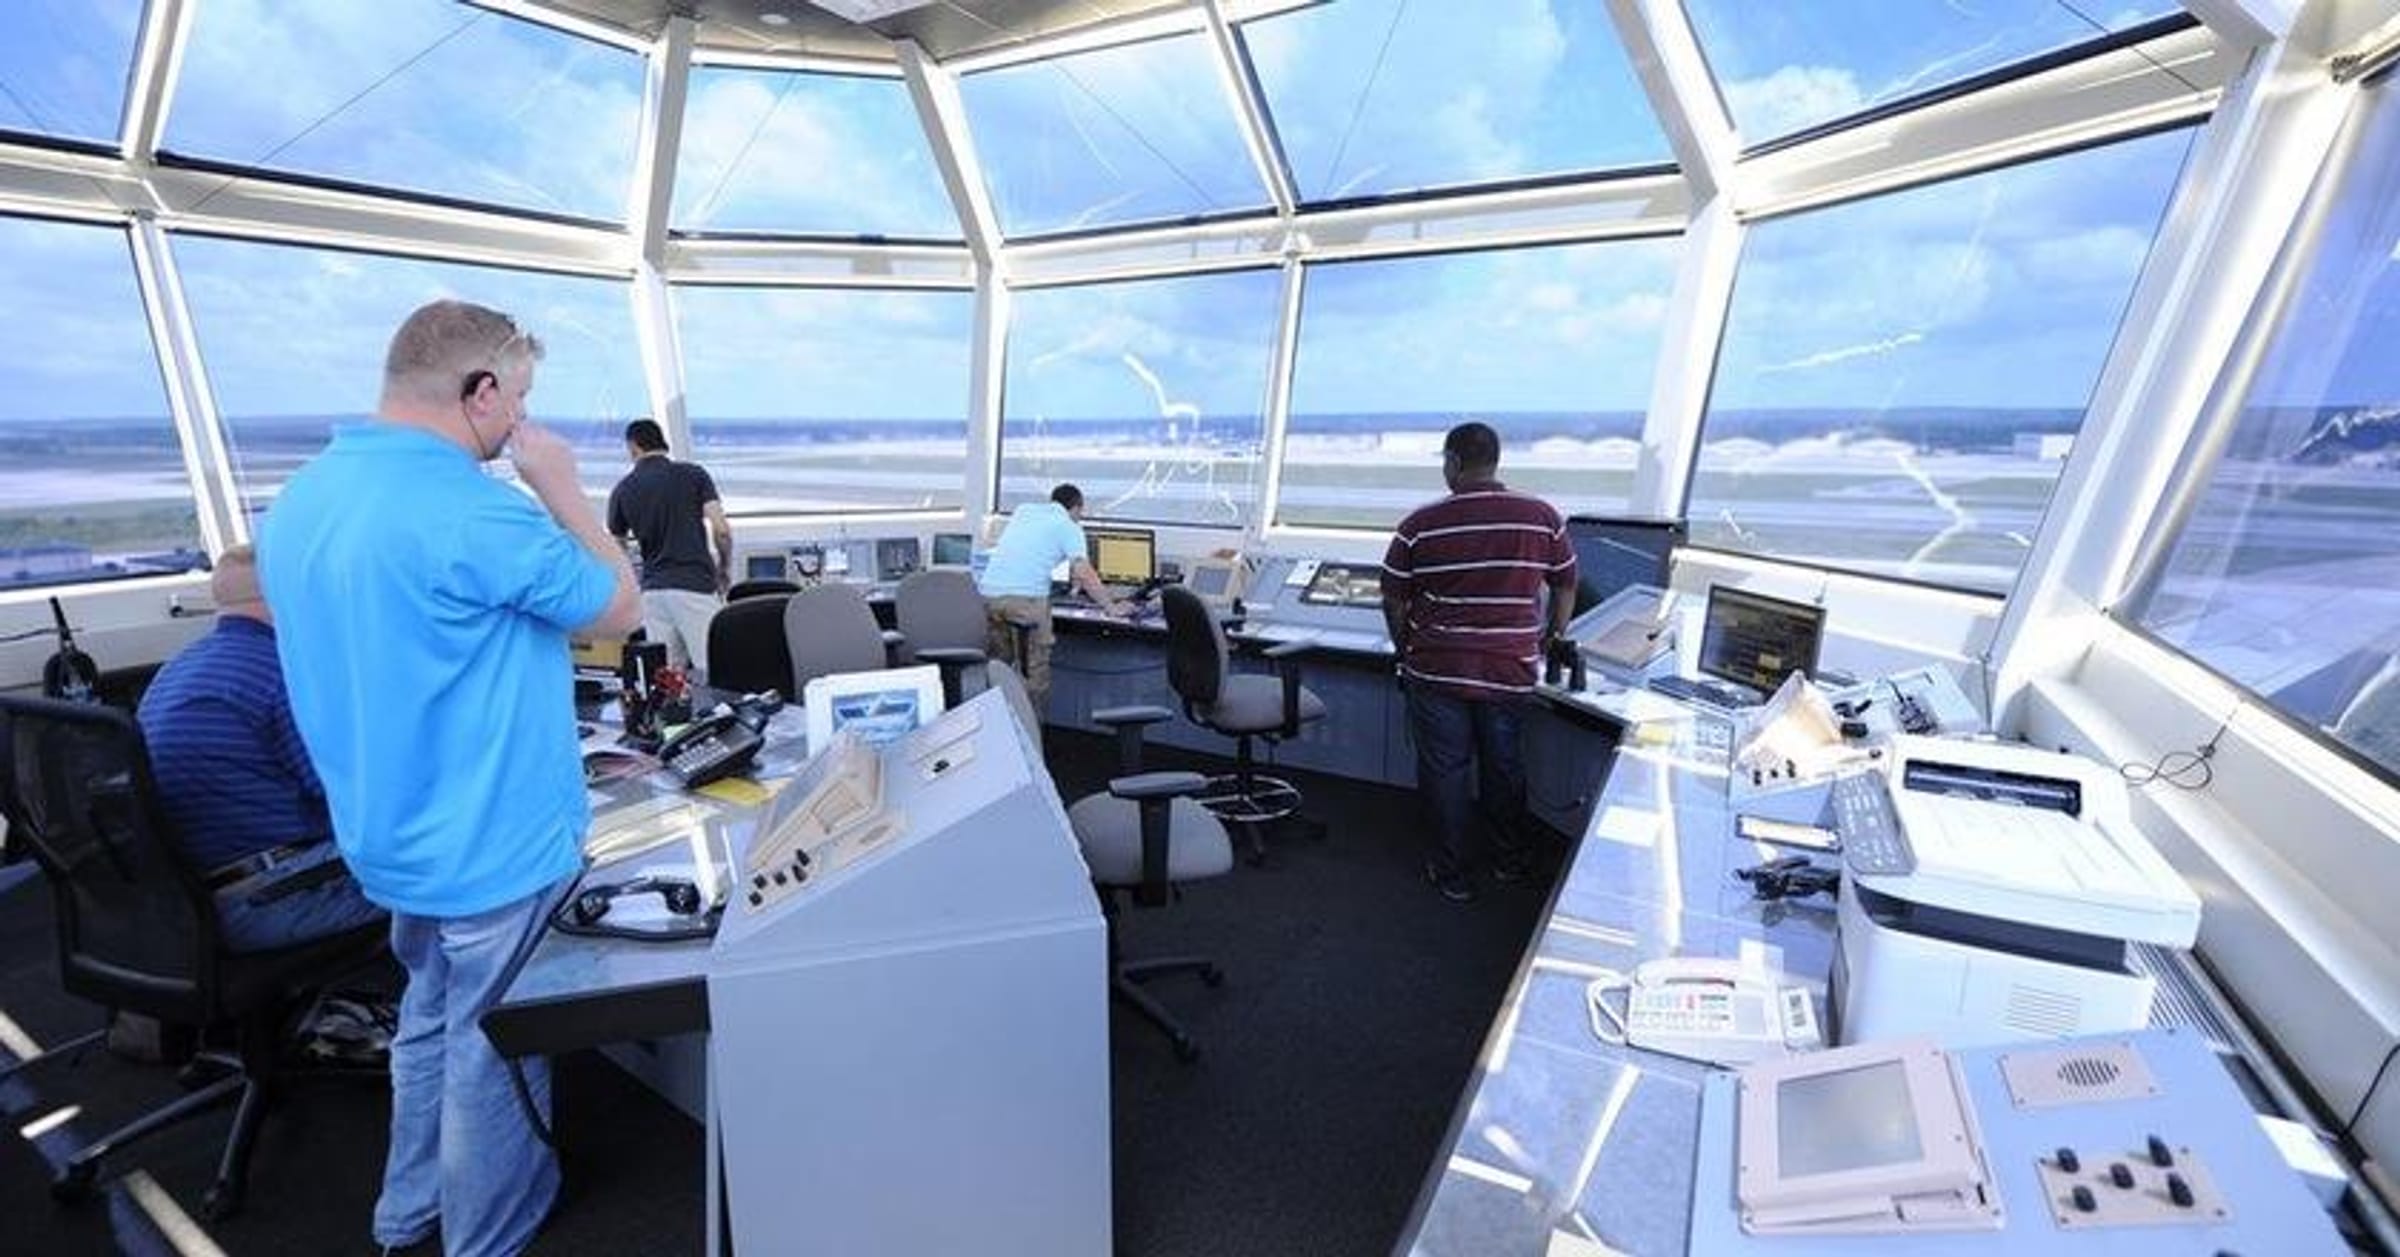 We Have Backups for Snoozing Air Traffic Controllers